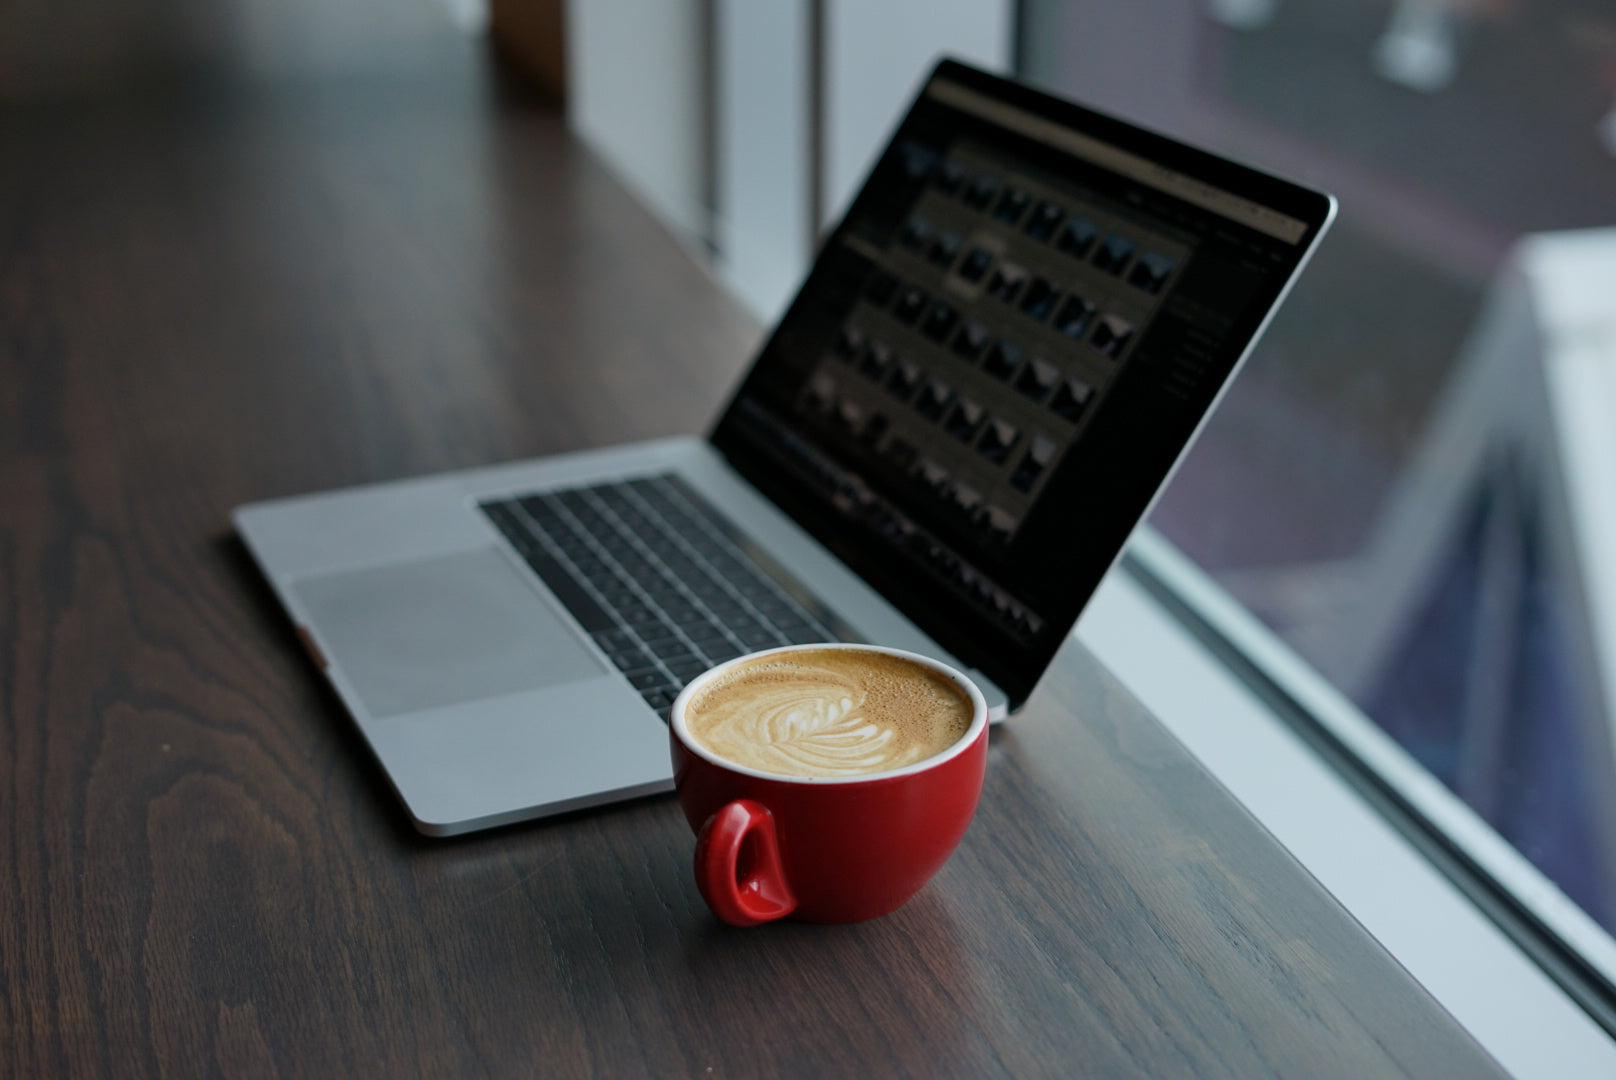 laptop and red cup on wooden desk with window